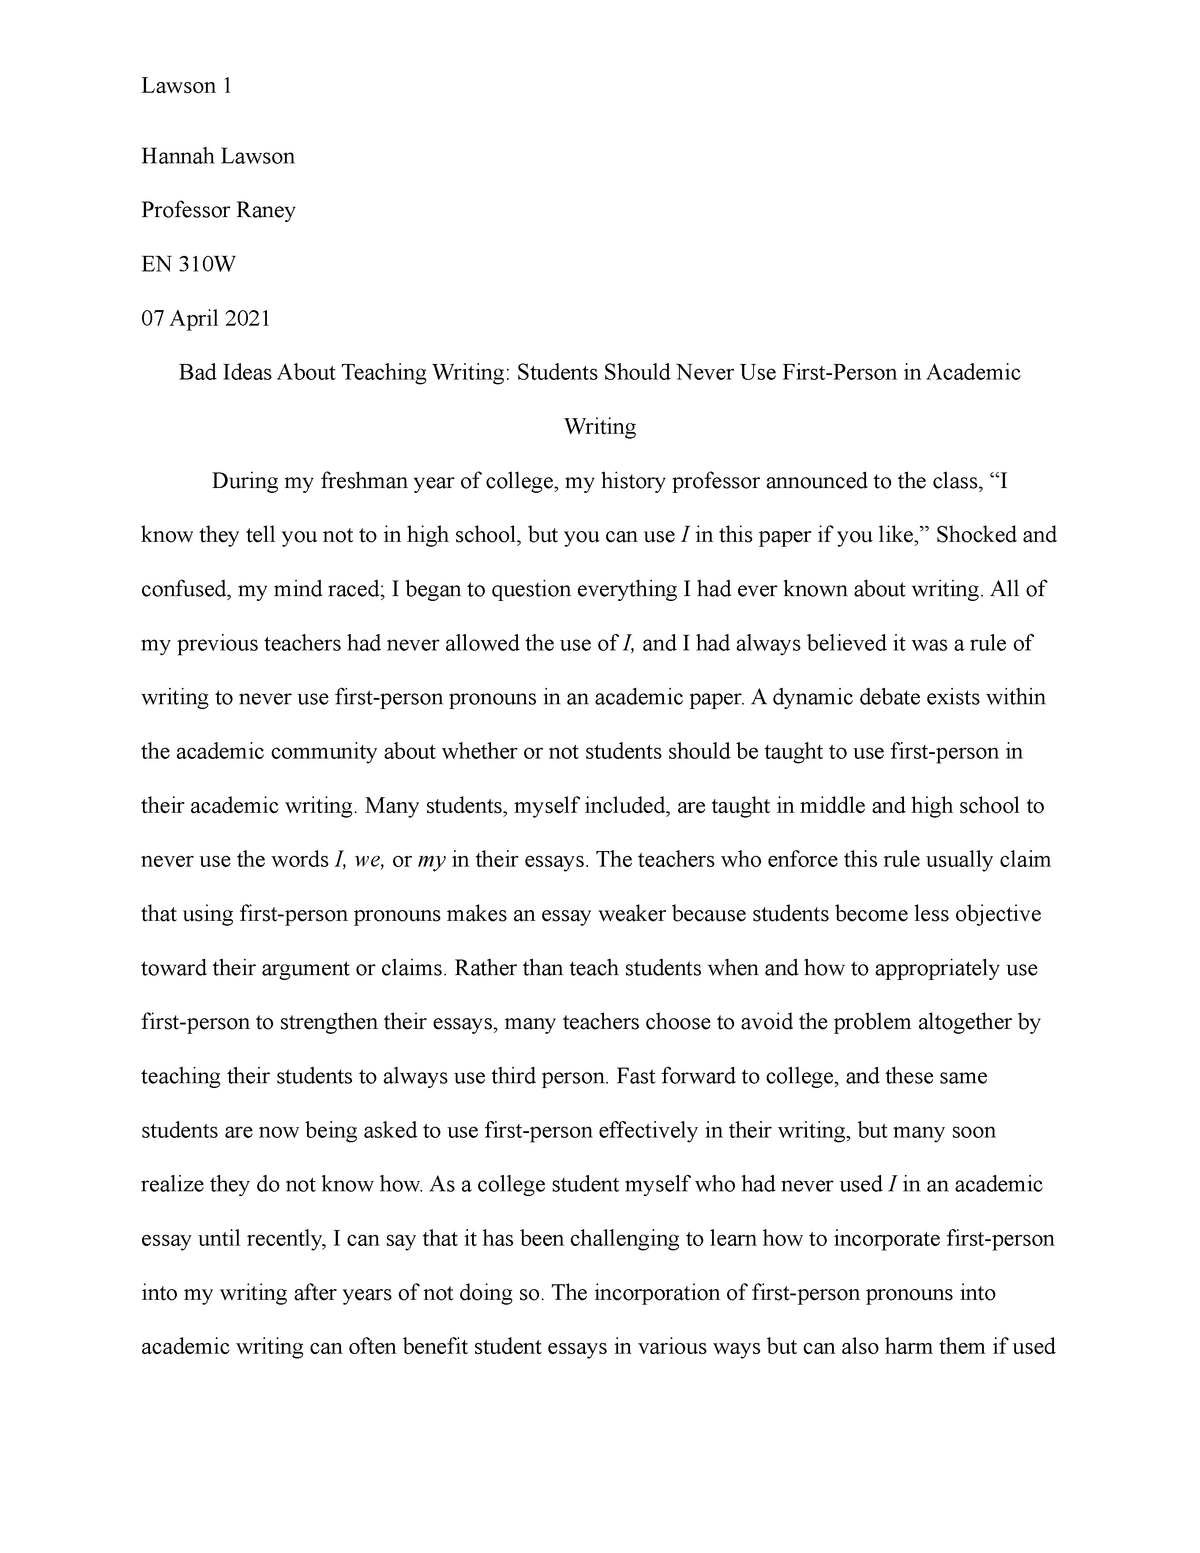 what makes a college essay bad